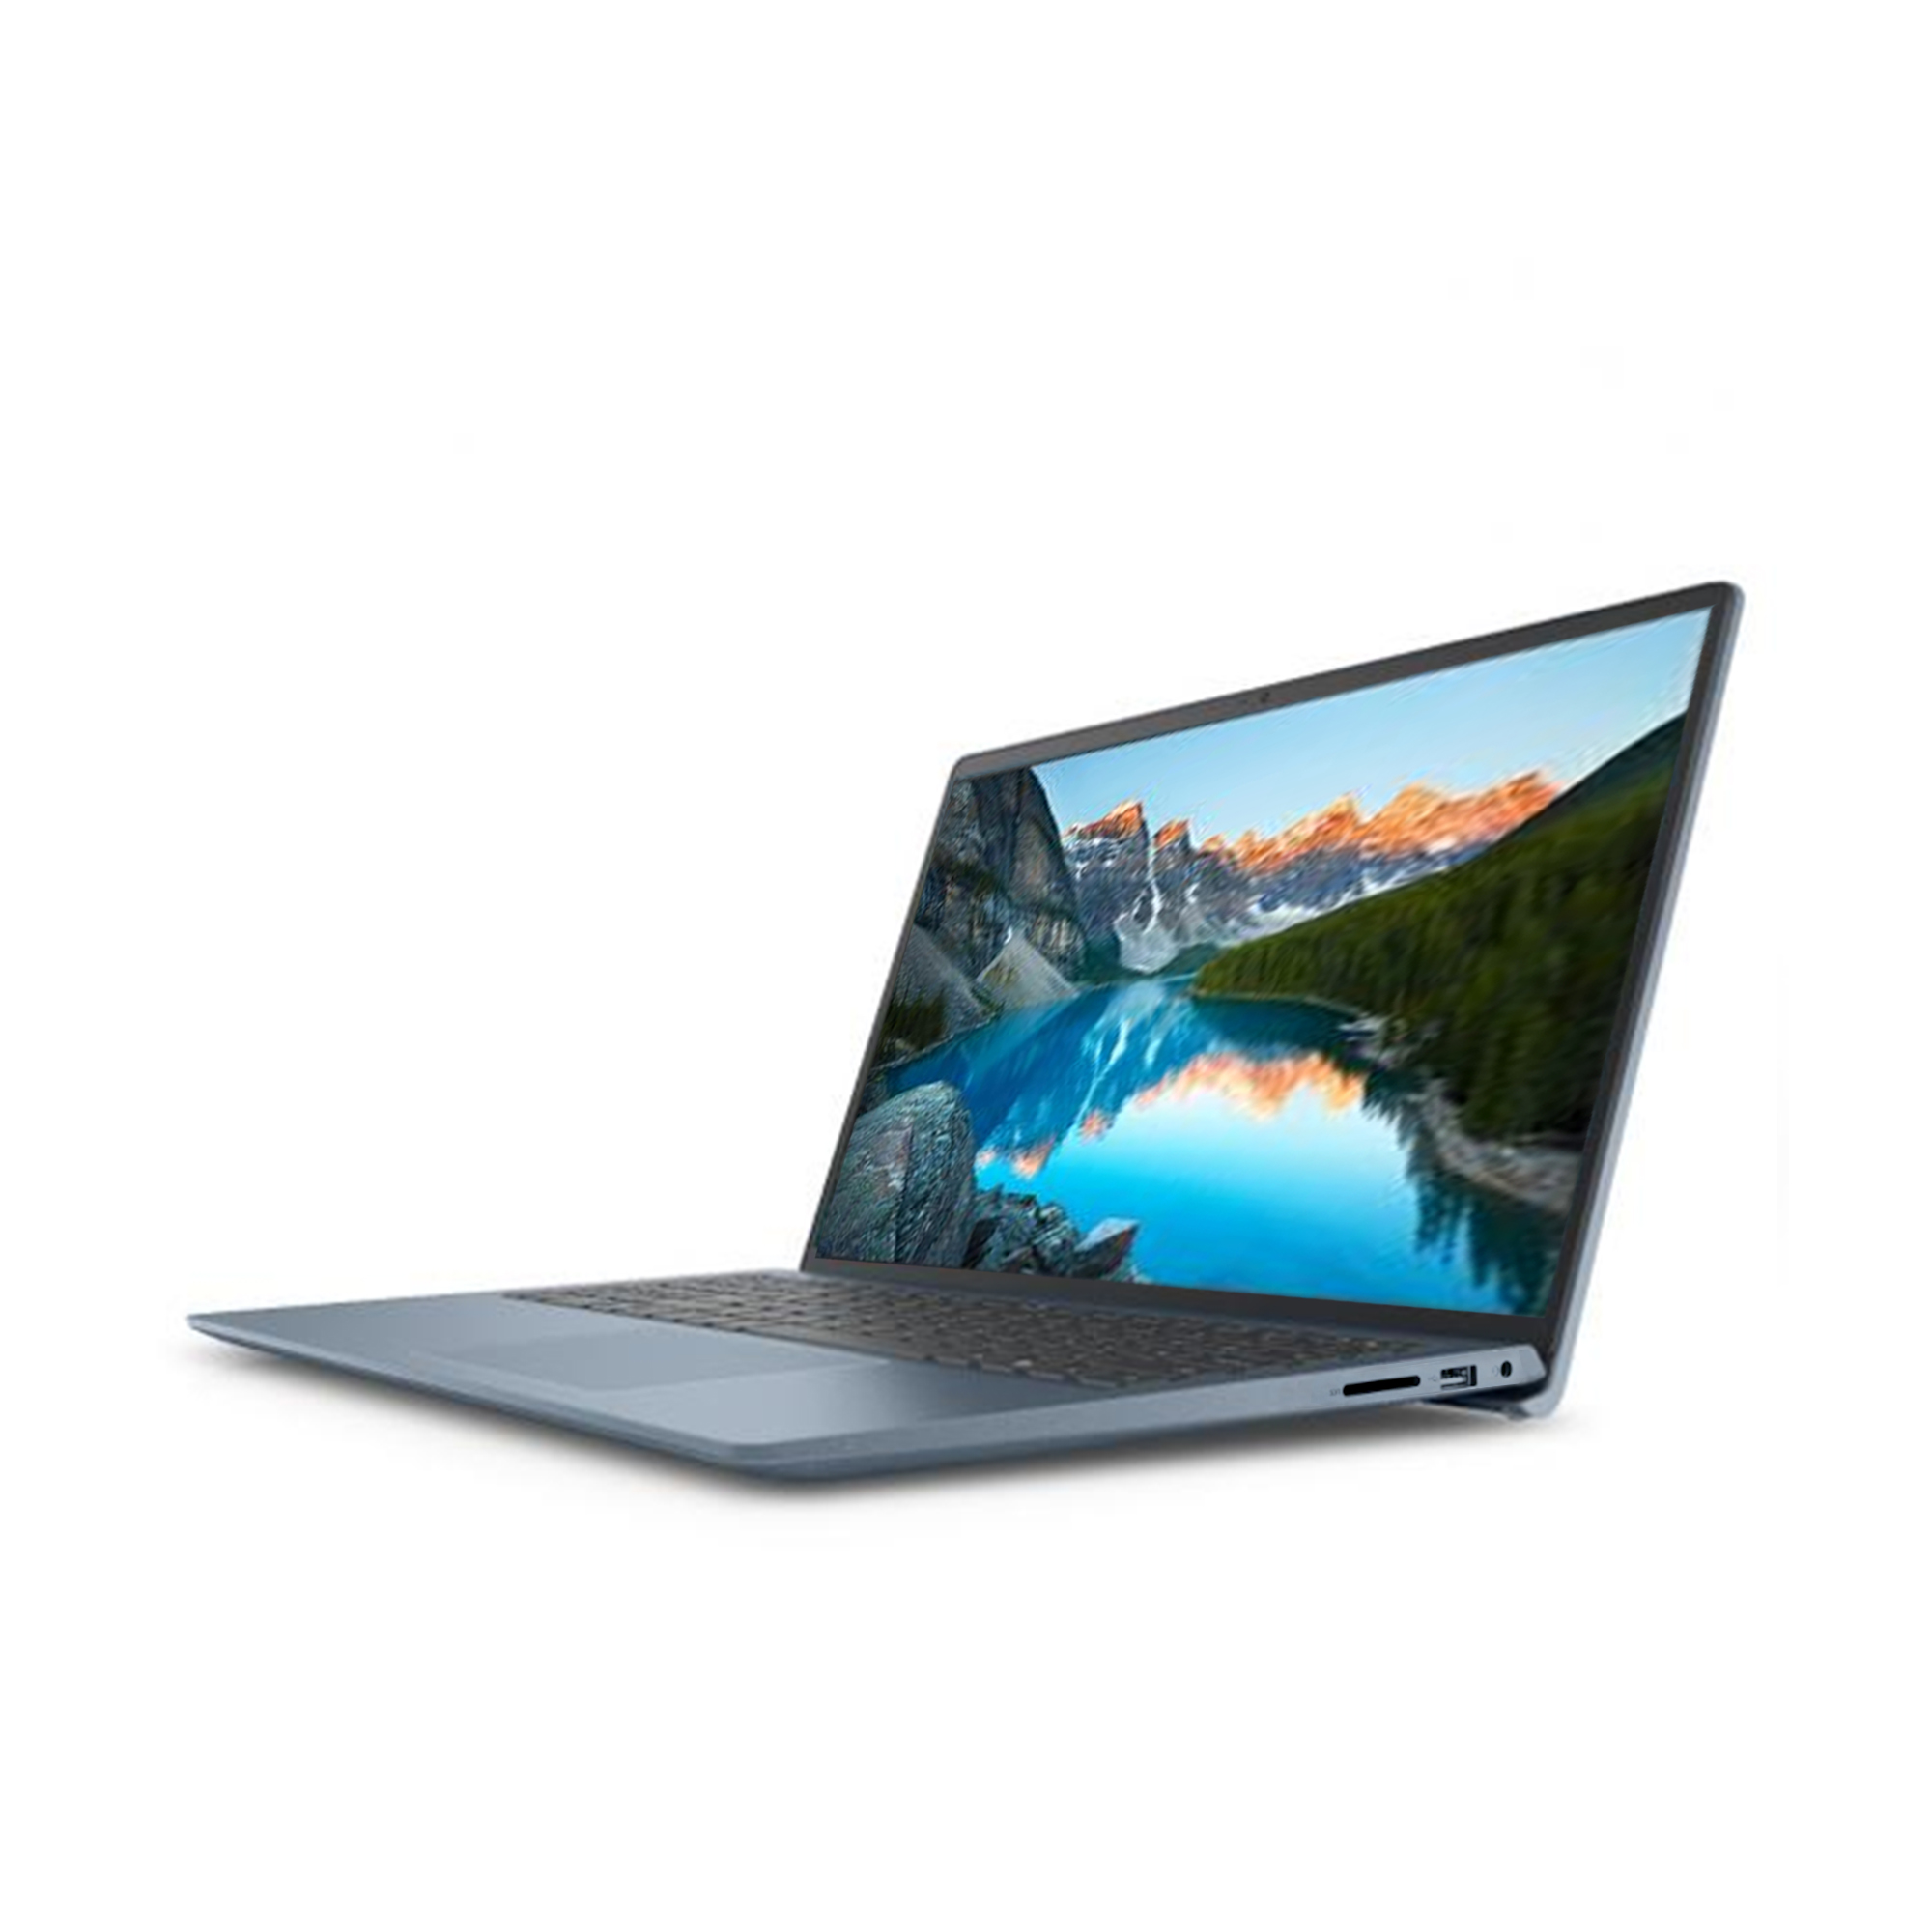 SALE] Dell Inspiron 3511 Laptop Core i3-1115G4 4Gb RAM 256Gb  PCIE NVME  SSD W10HOFCHS2019  Inches FHD Intel UHD Graphics - Accenthub